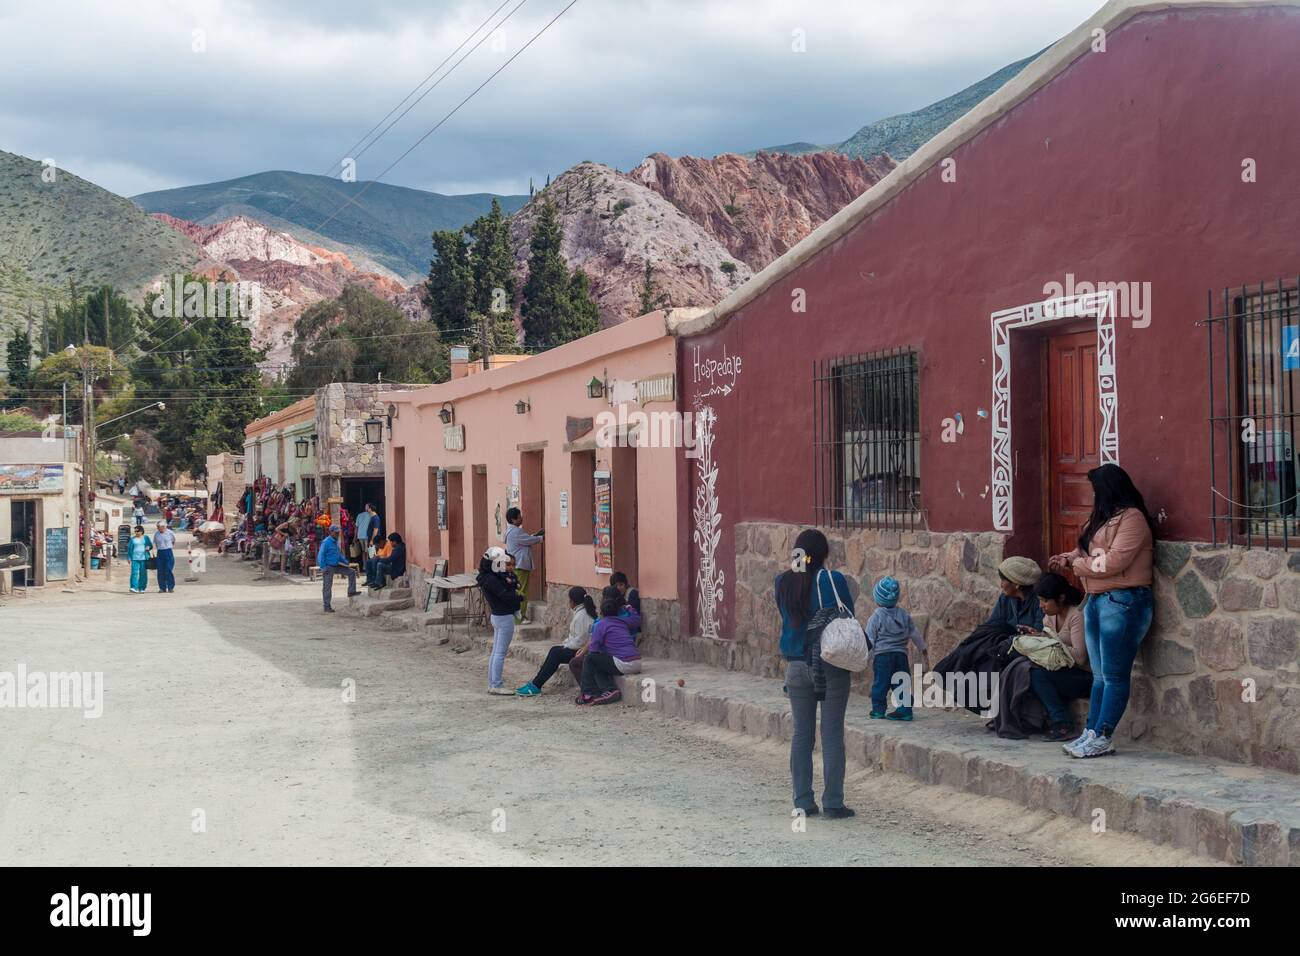 PURMAMARCA, ARGENTINA - APRIL 11, 2015: People on a street in Purmamarca village, Argentina Stock Photo